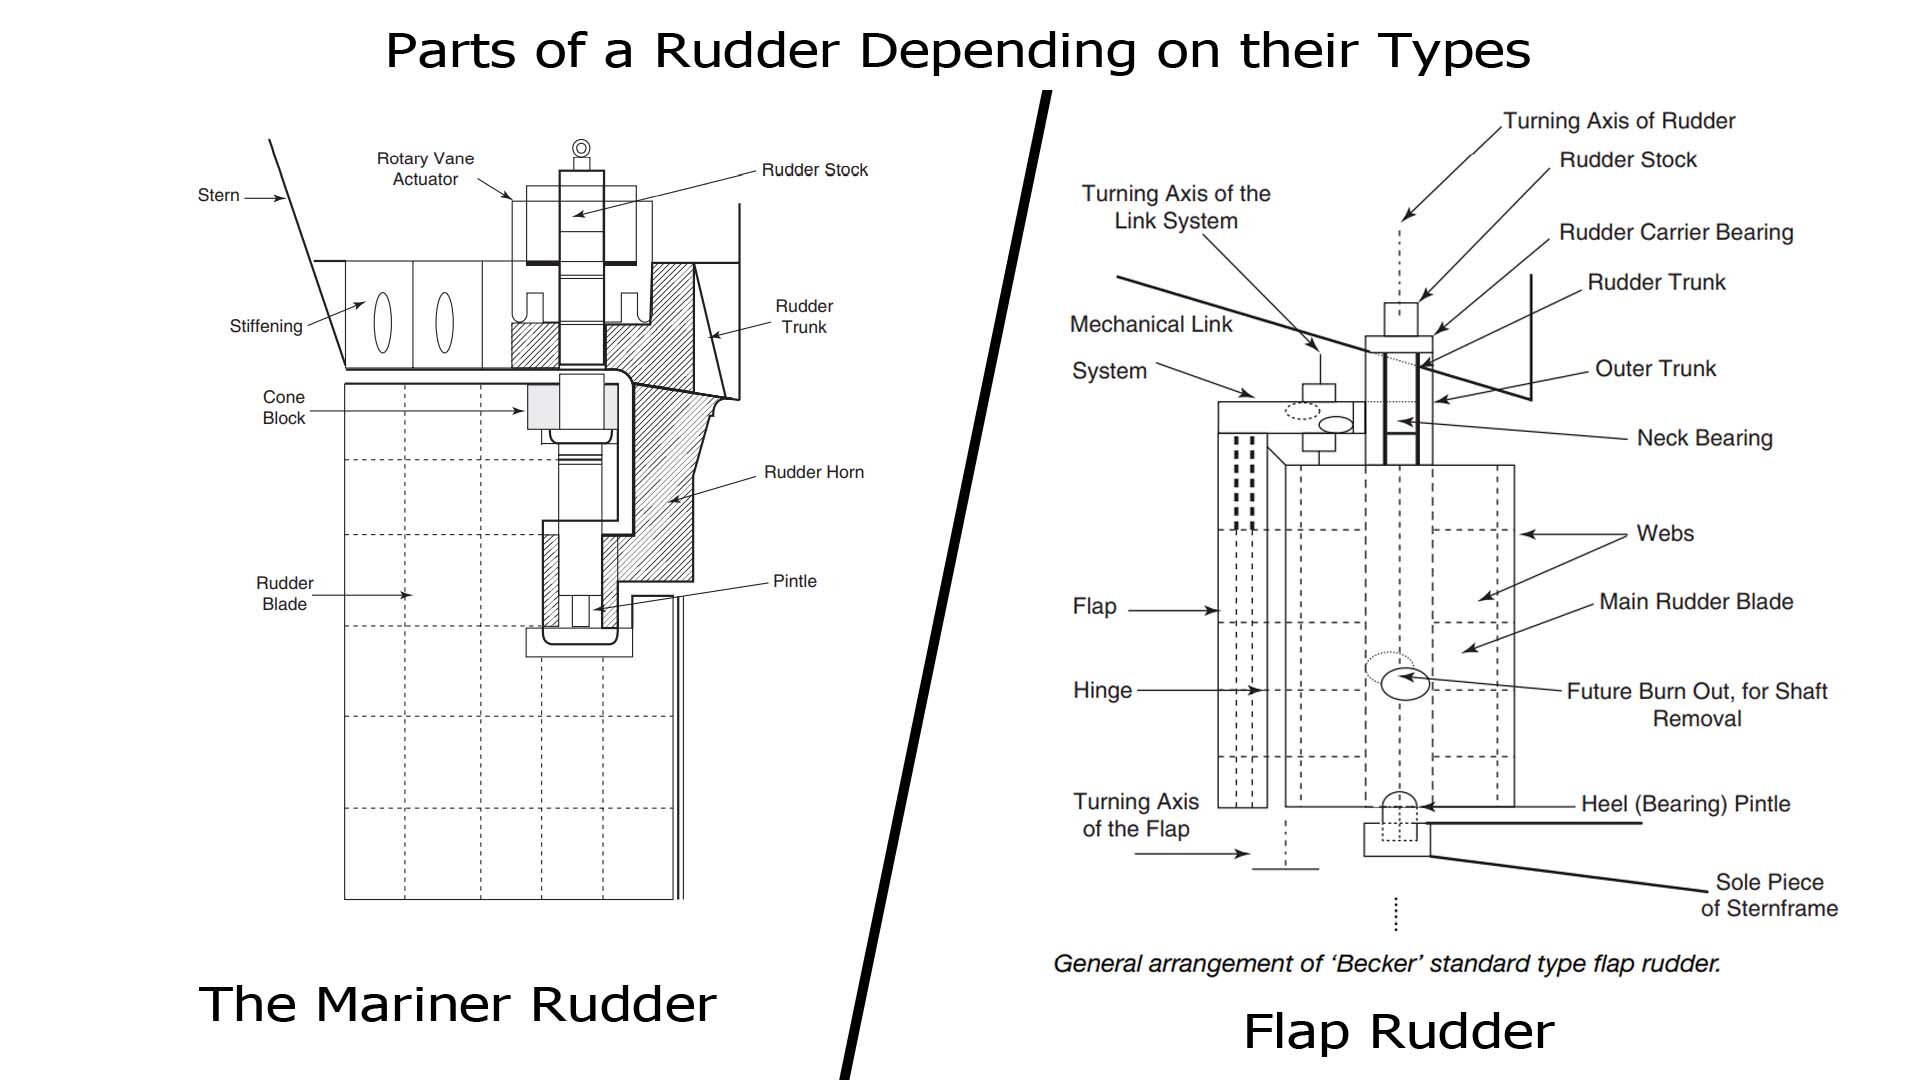 Parts of a rudder depending on their Types. Mariner Rudder and Flap Rudder.